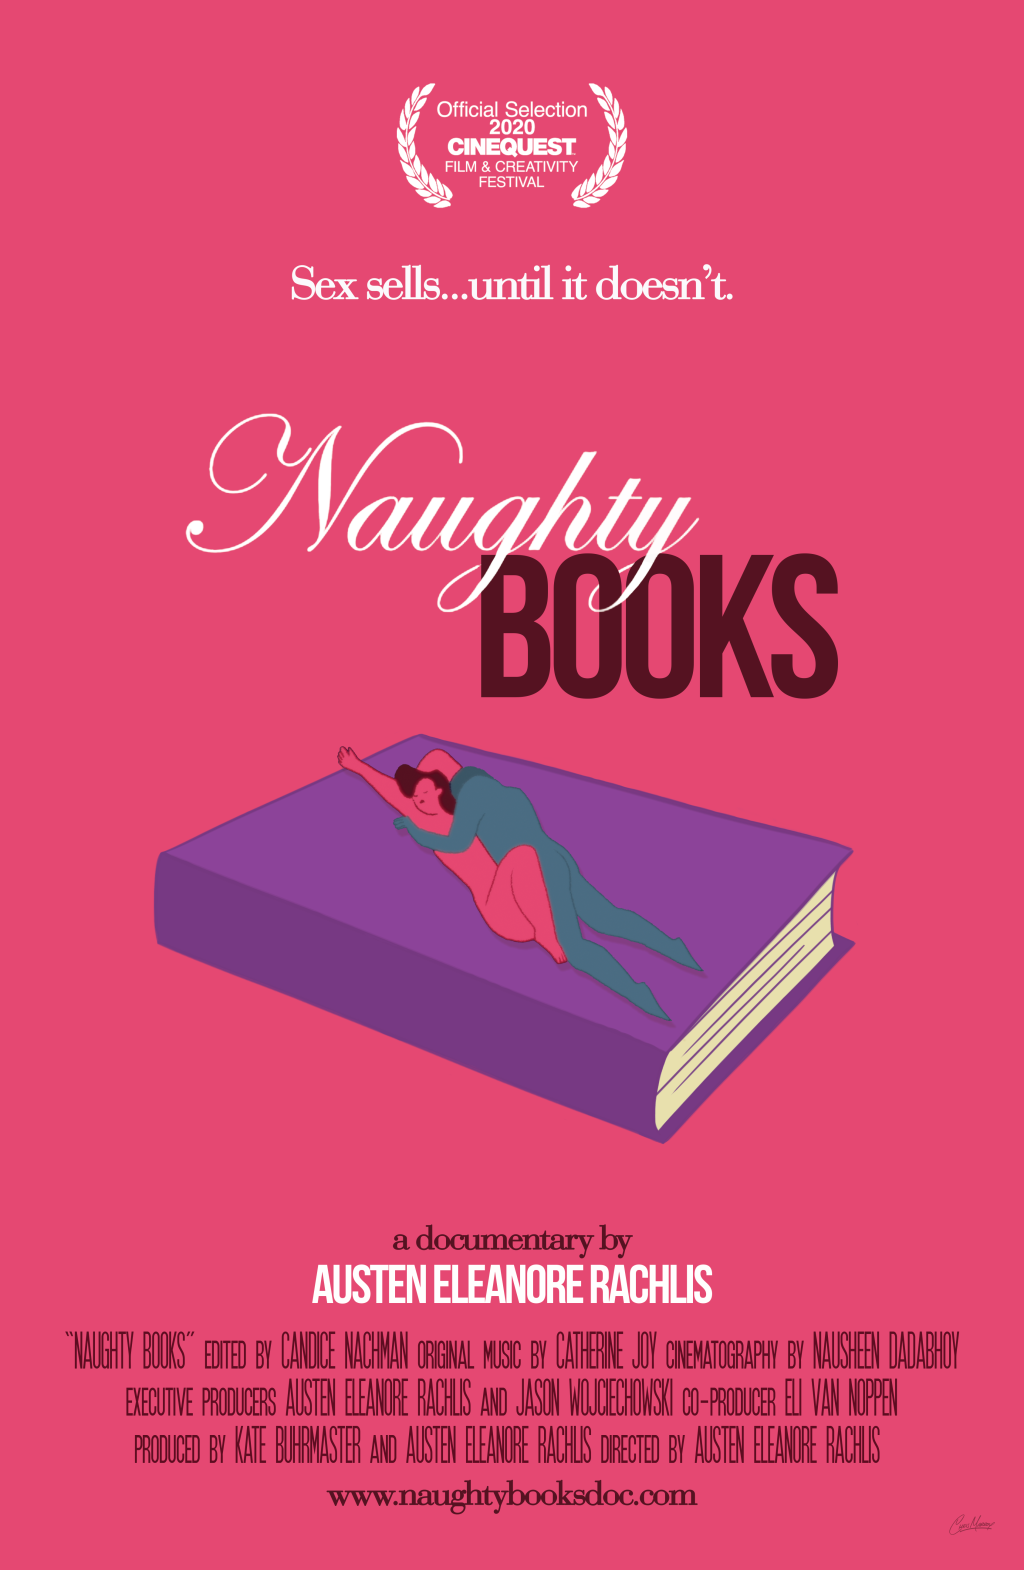 NAUGHTY BOOKS: A Documentary is NOW AVAILABLE !!